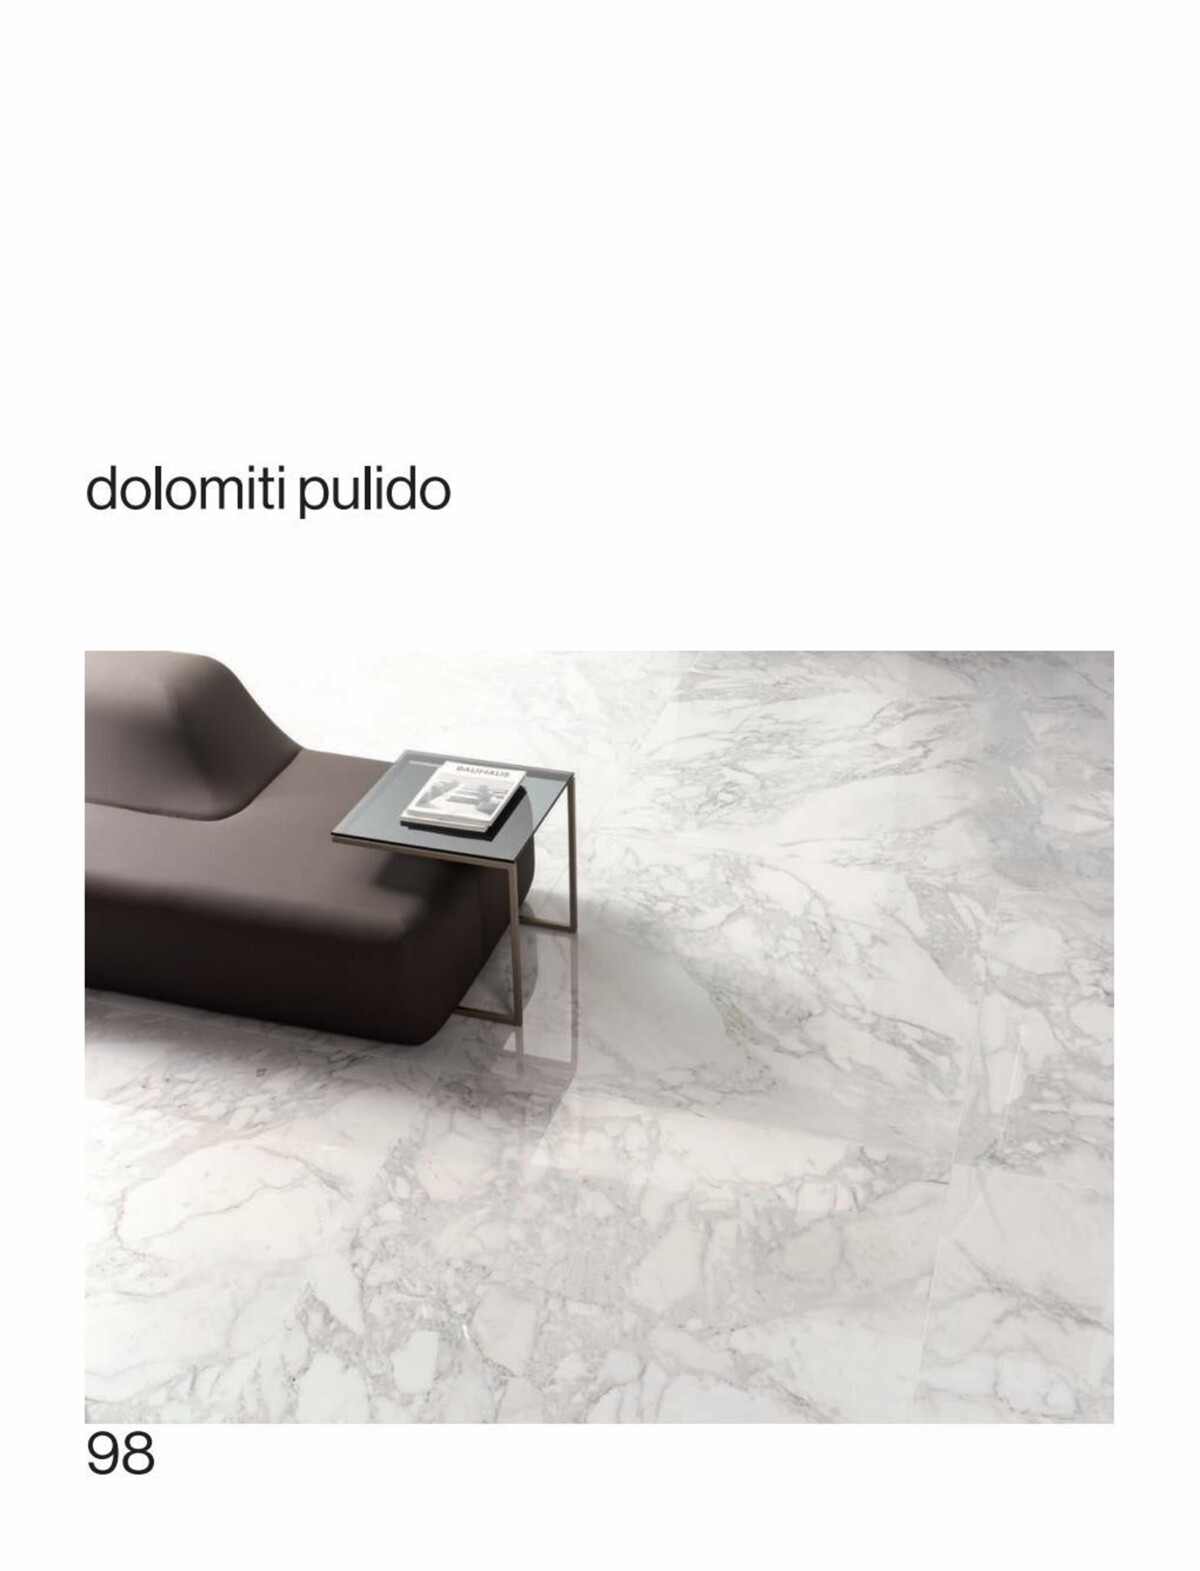 Catalogue MARMI,a ceramic tile that echoes the purity of marble, page 00098